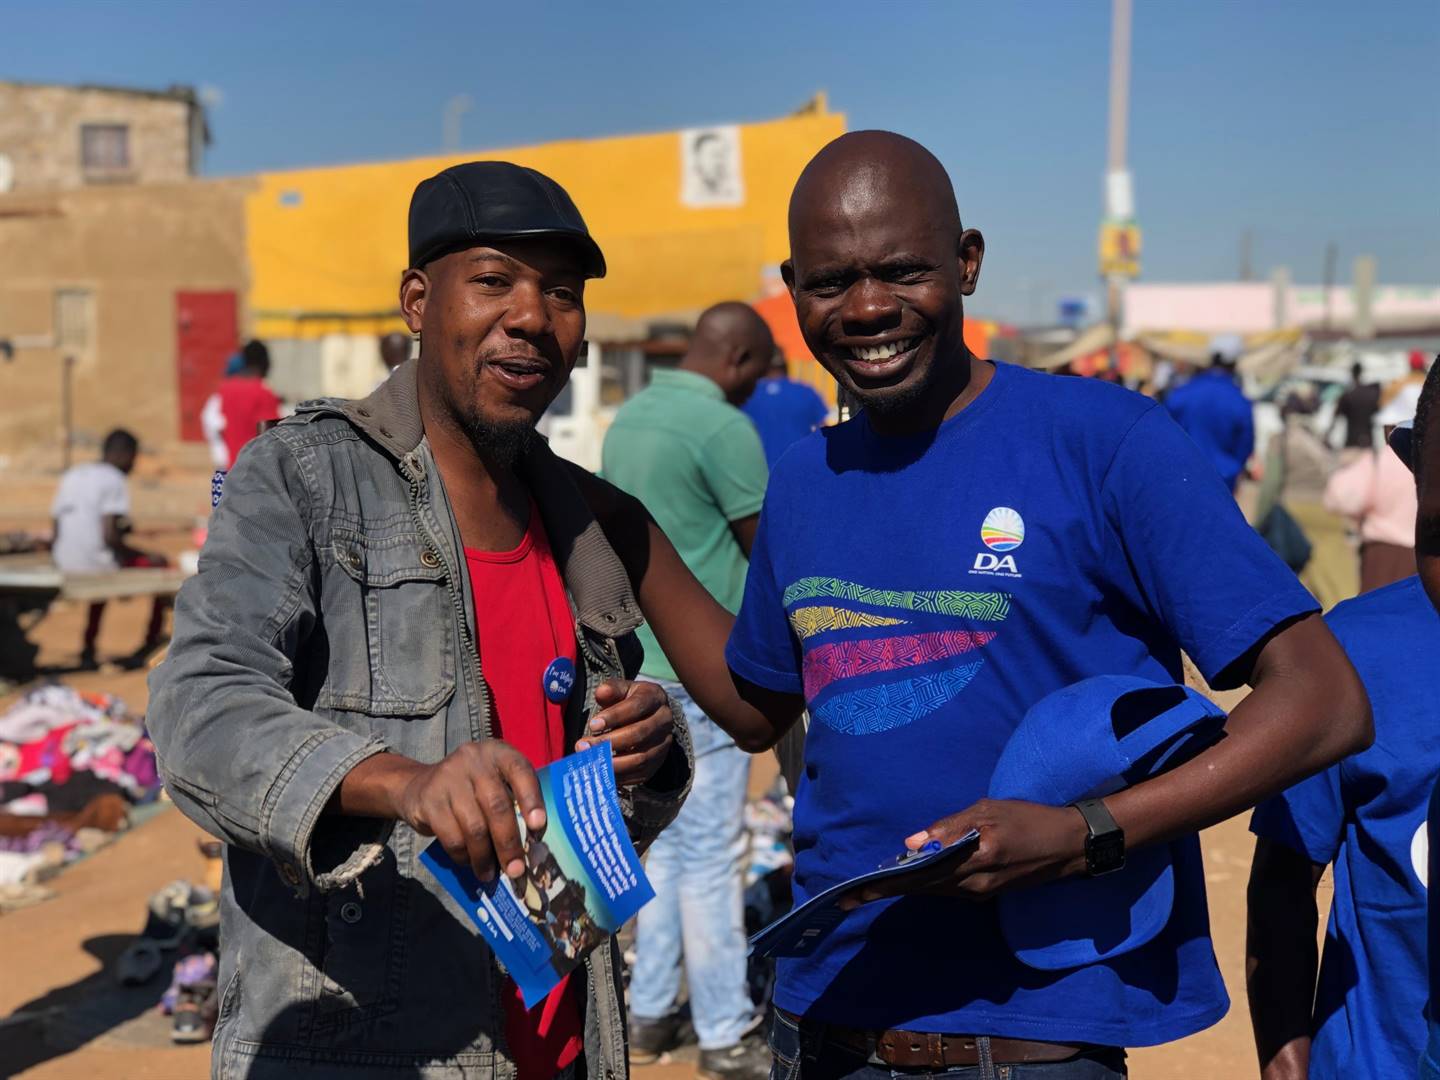 DA member of the Gauteng Provincial Legislature Makashule Gana engaging a community member on the campaign trail in Ivory Park. Picture: Juniour Khumalo